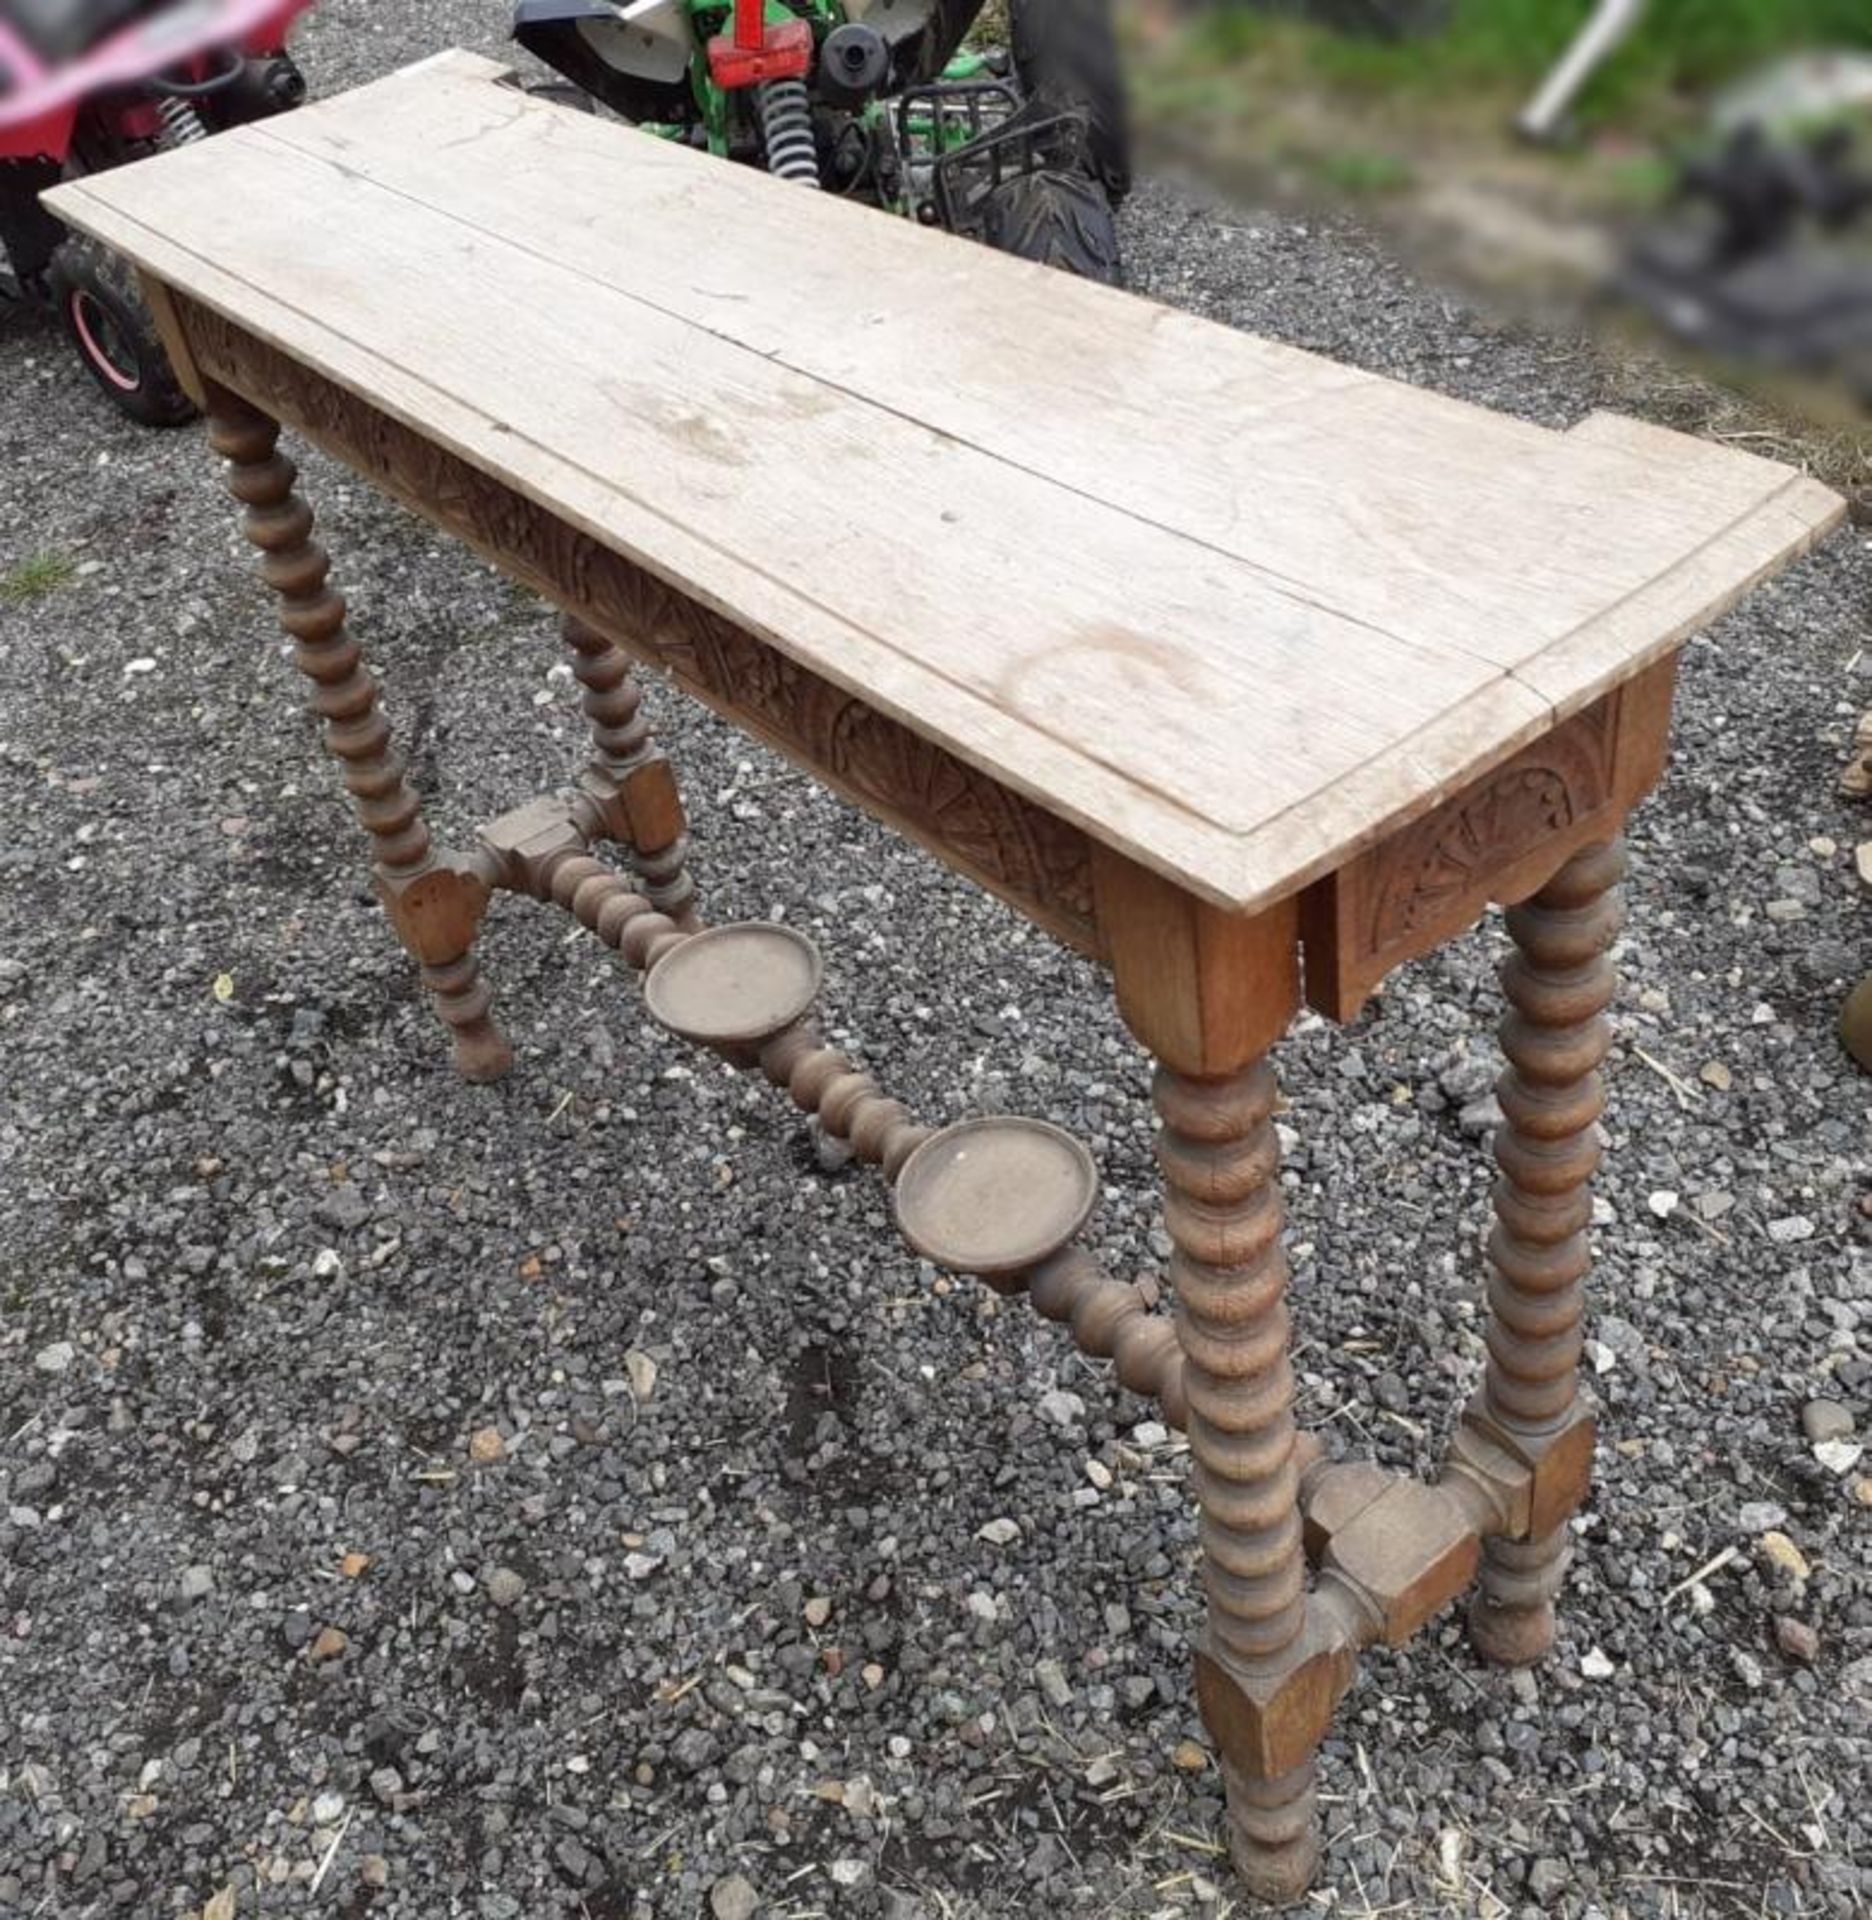 1 x Carved Wooden Console / Hallway Table With A Secret Drawer At Each End - Dimensions: Height 90cm - Image 7 of 8